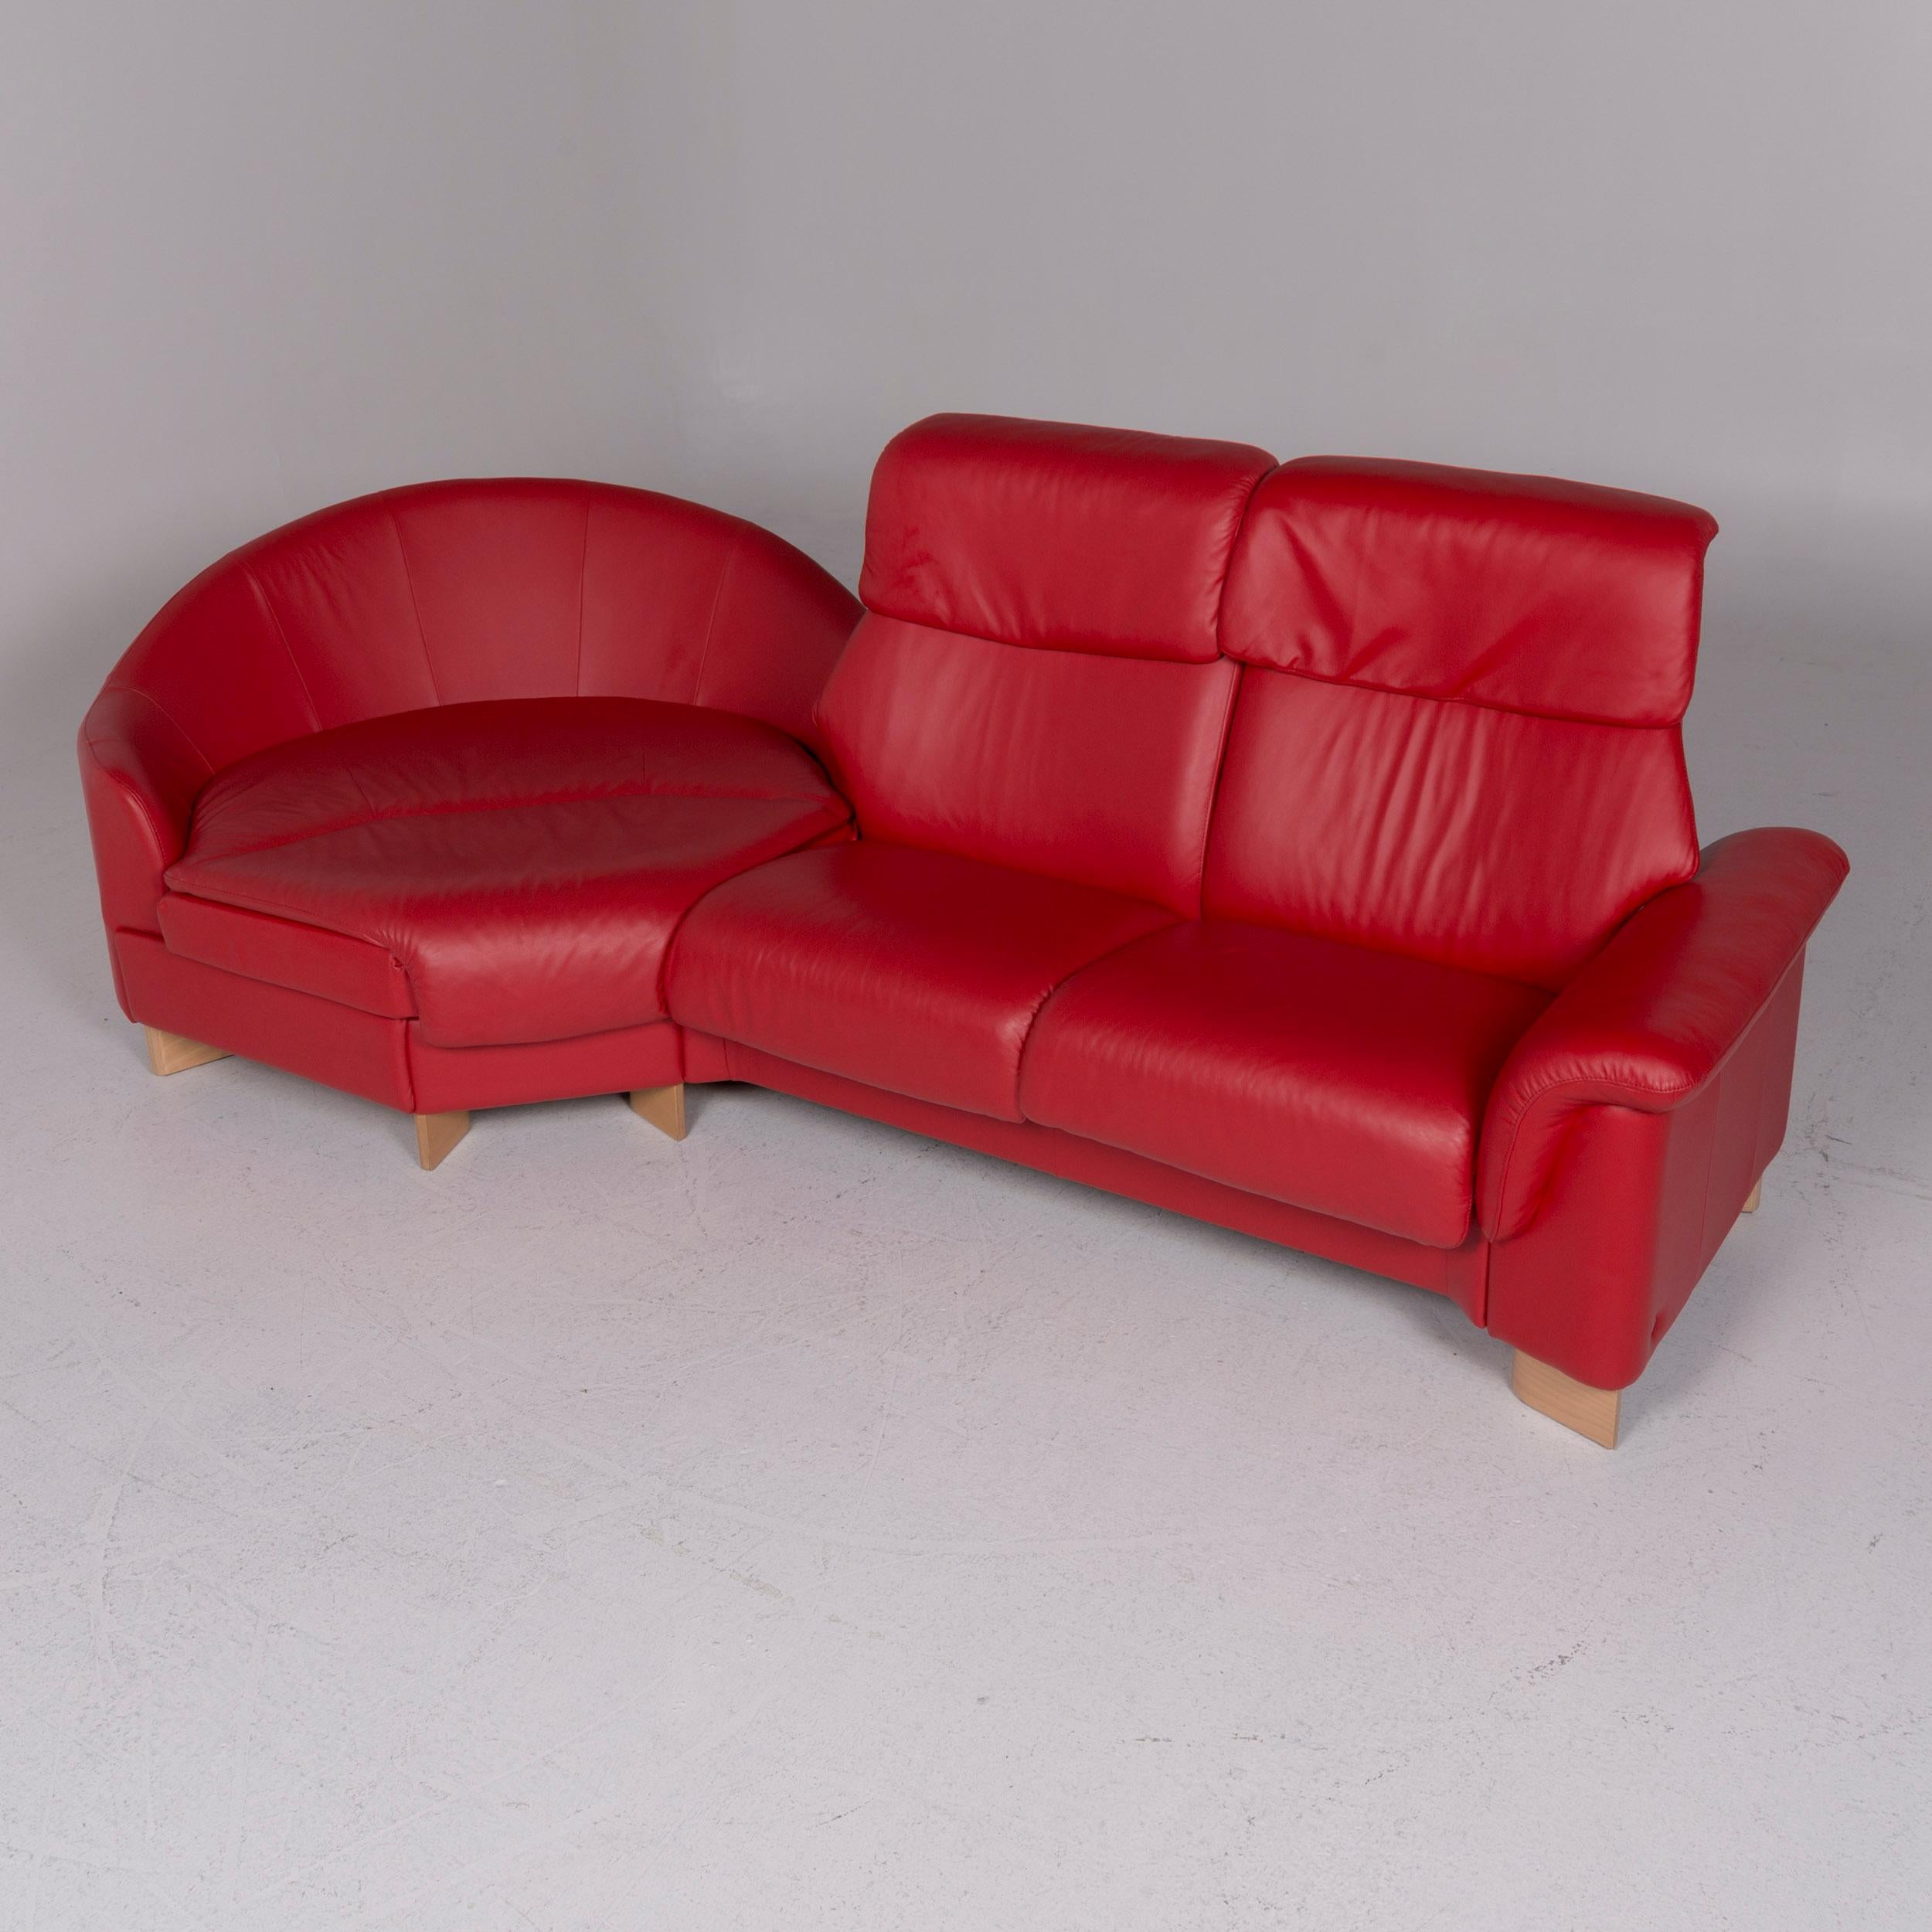 We bring to you a Stressless leather sofa set red corner sofa armchair stool.

 Product measurements in centimeters:
 
Depth 86
Width 286
Height 104
Seat-height 46
Rest-height 59
Seat-depth 52
Seat-width 230
Back-height 60.


  